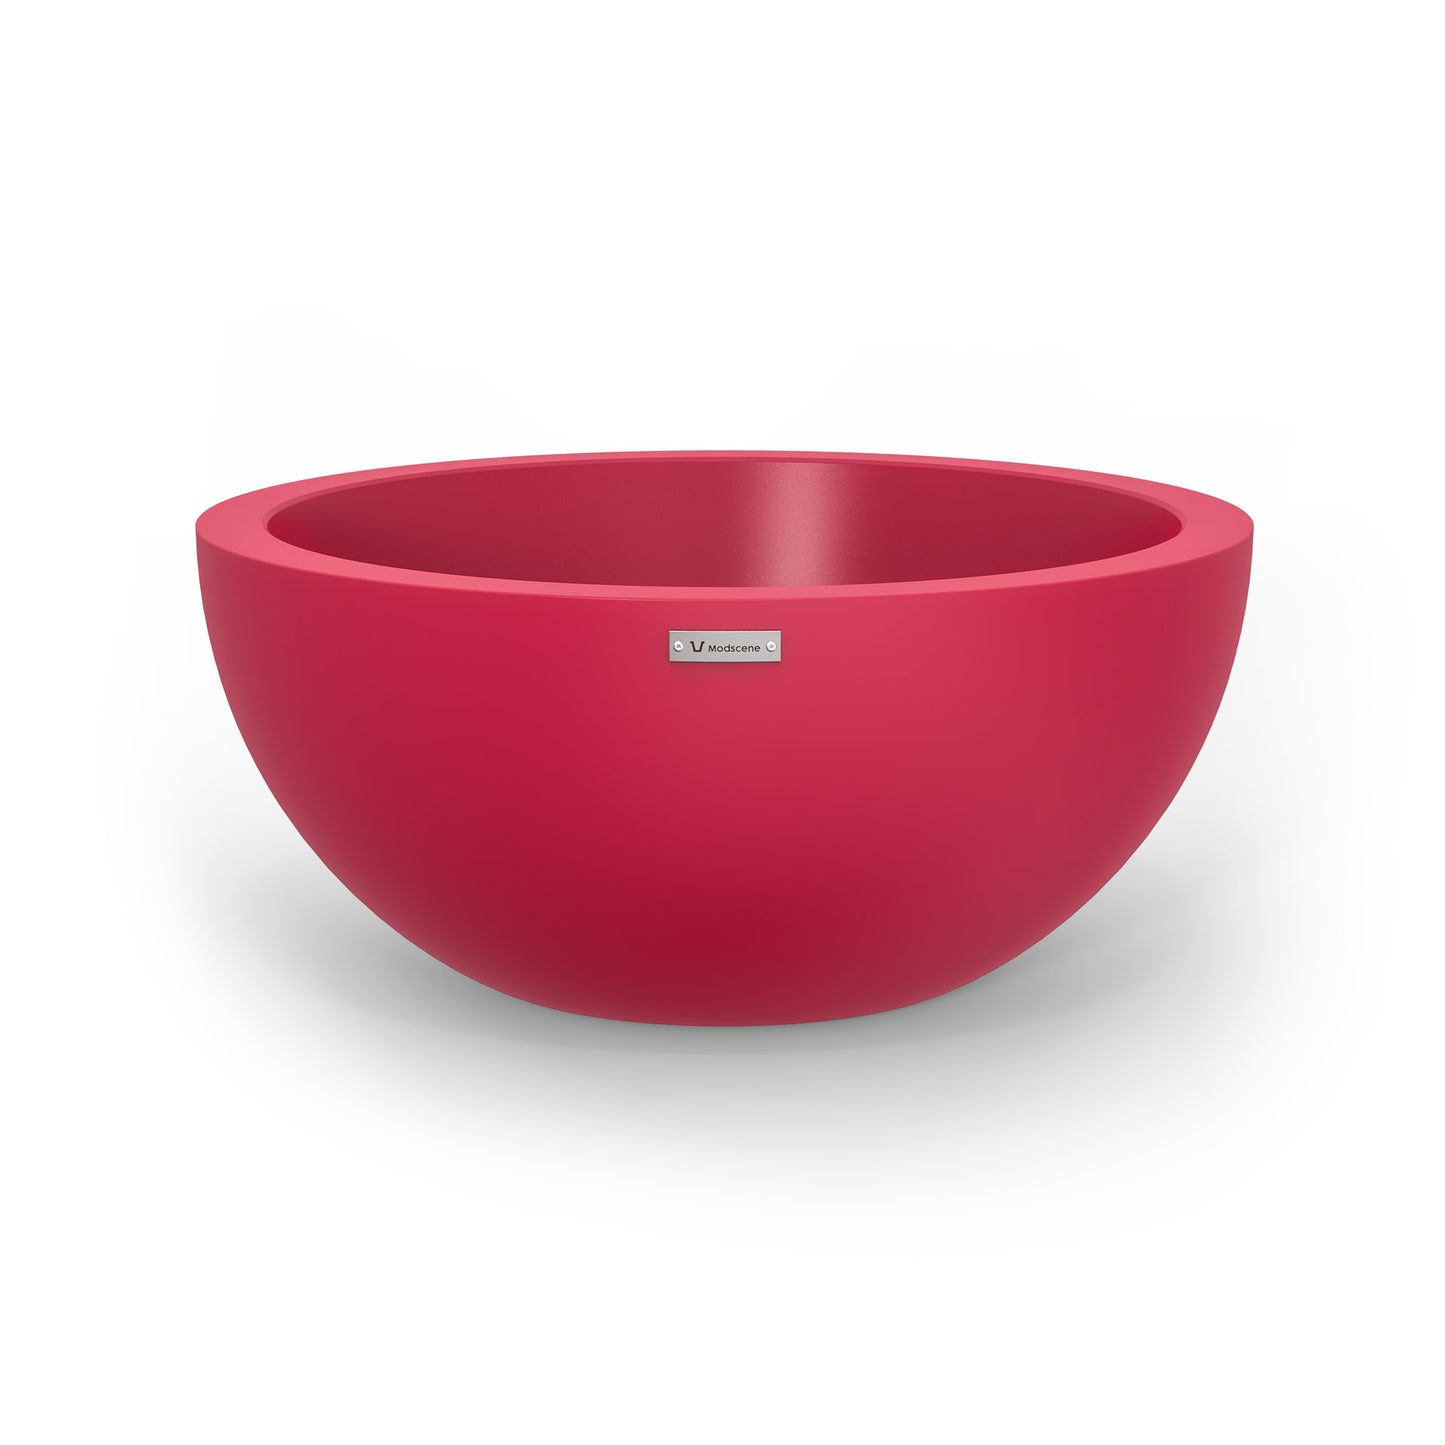 A large planter bowl in pink made by Modscene.